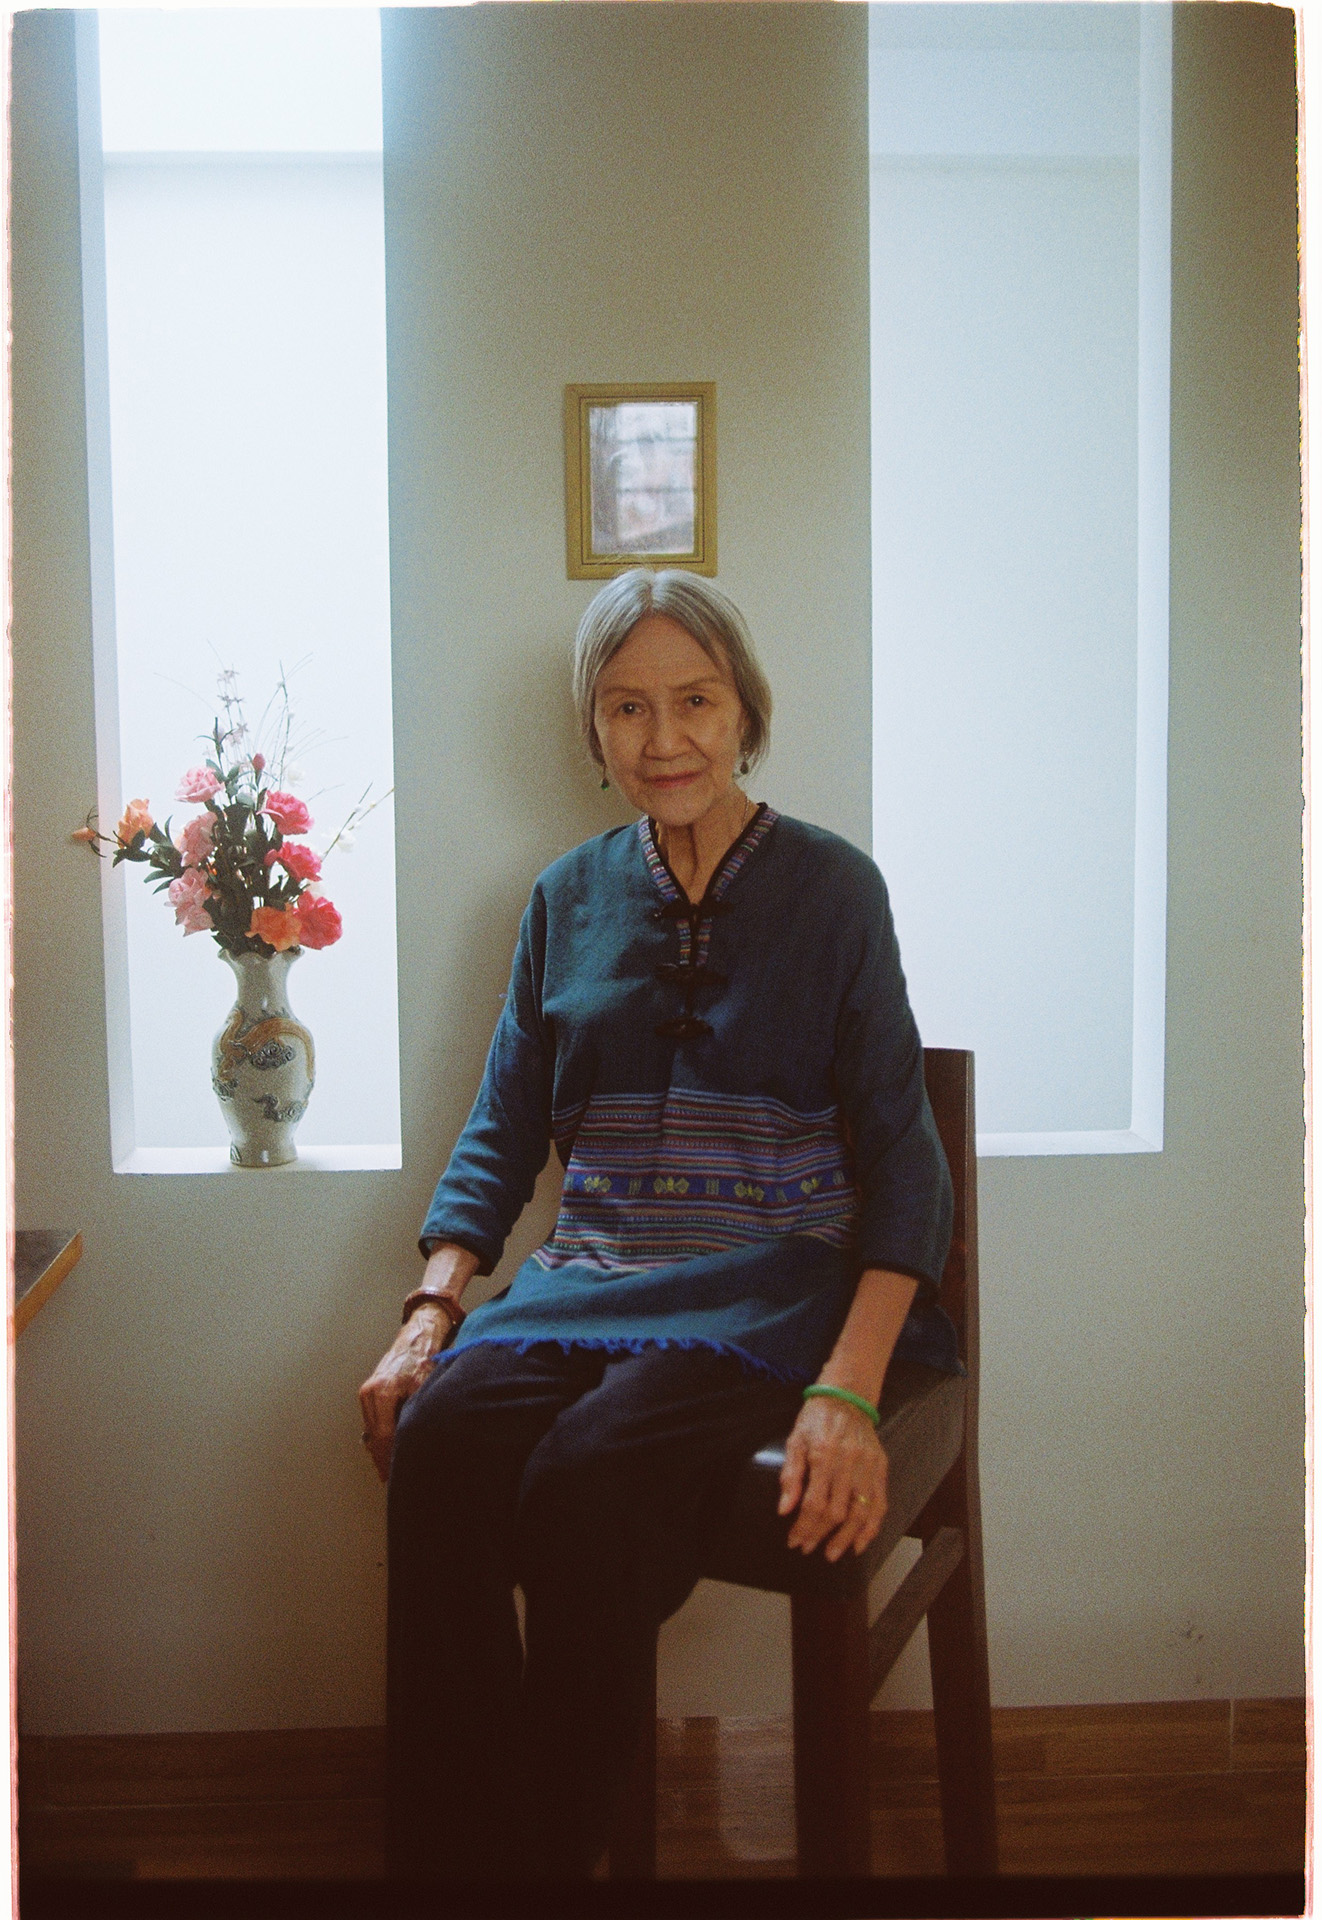 Hoa An elder Vietnamese woman sits and poses for the photograph by her alter.